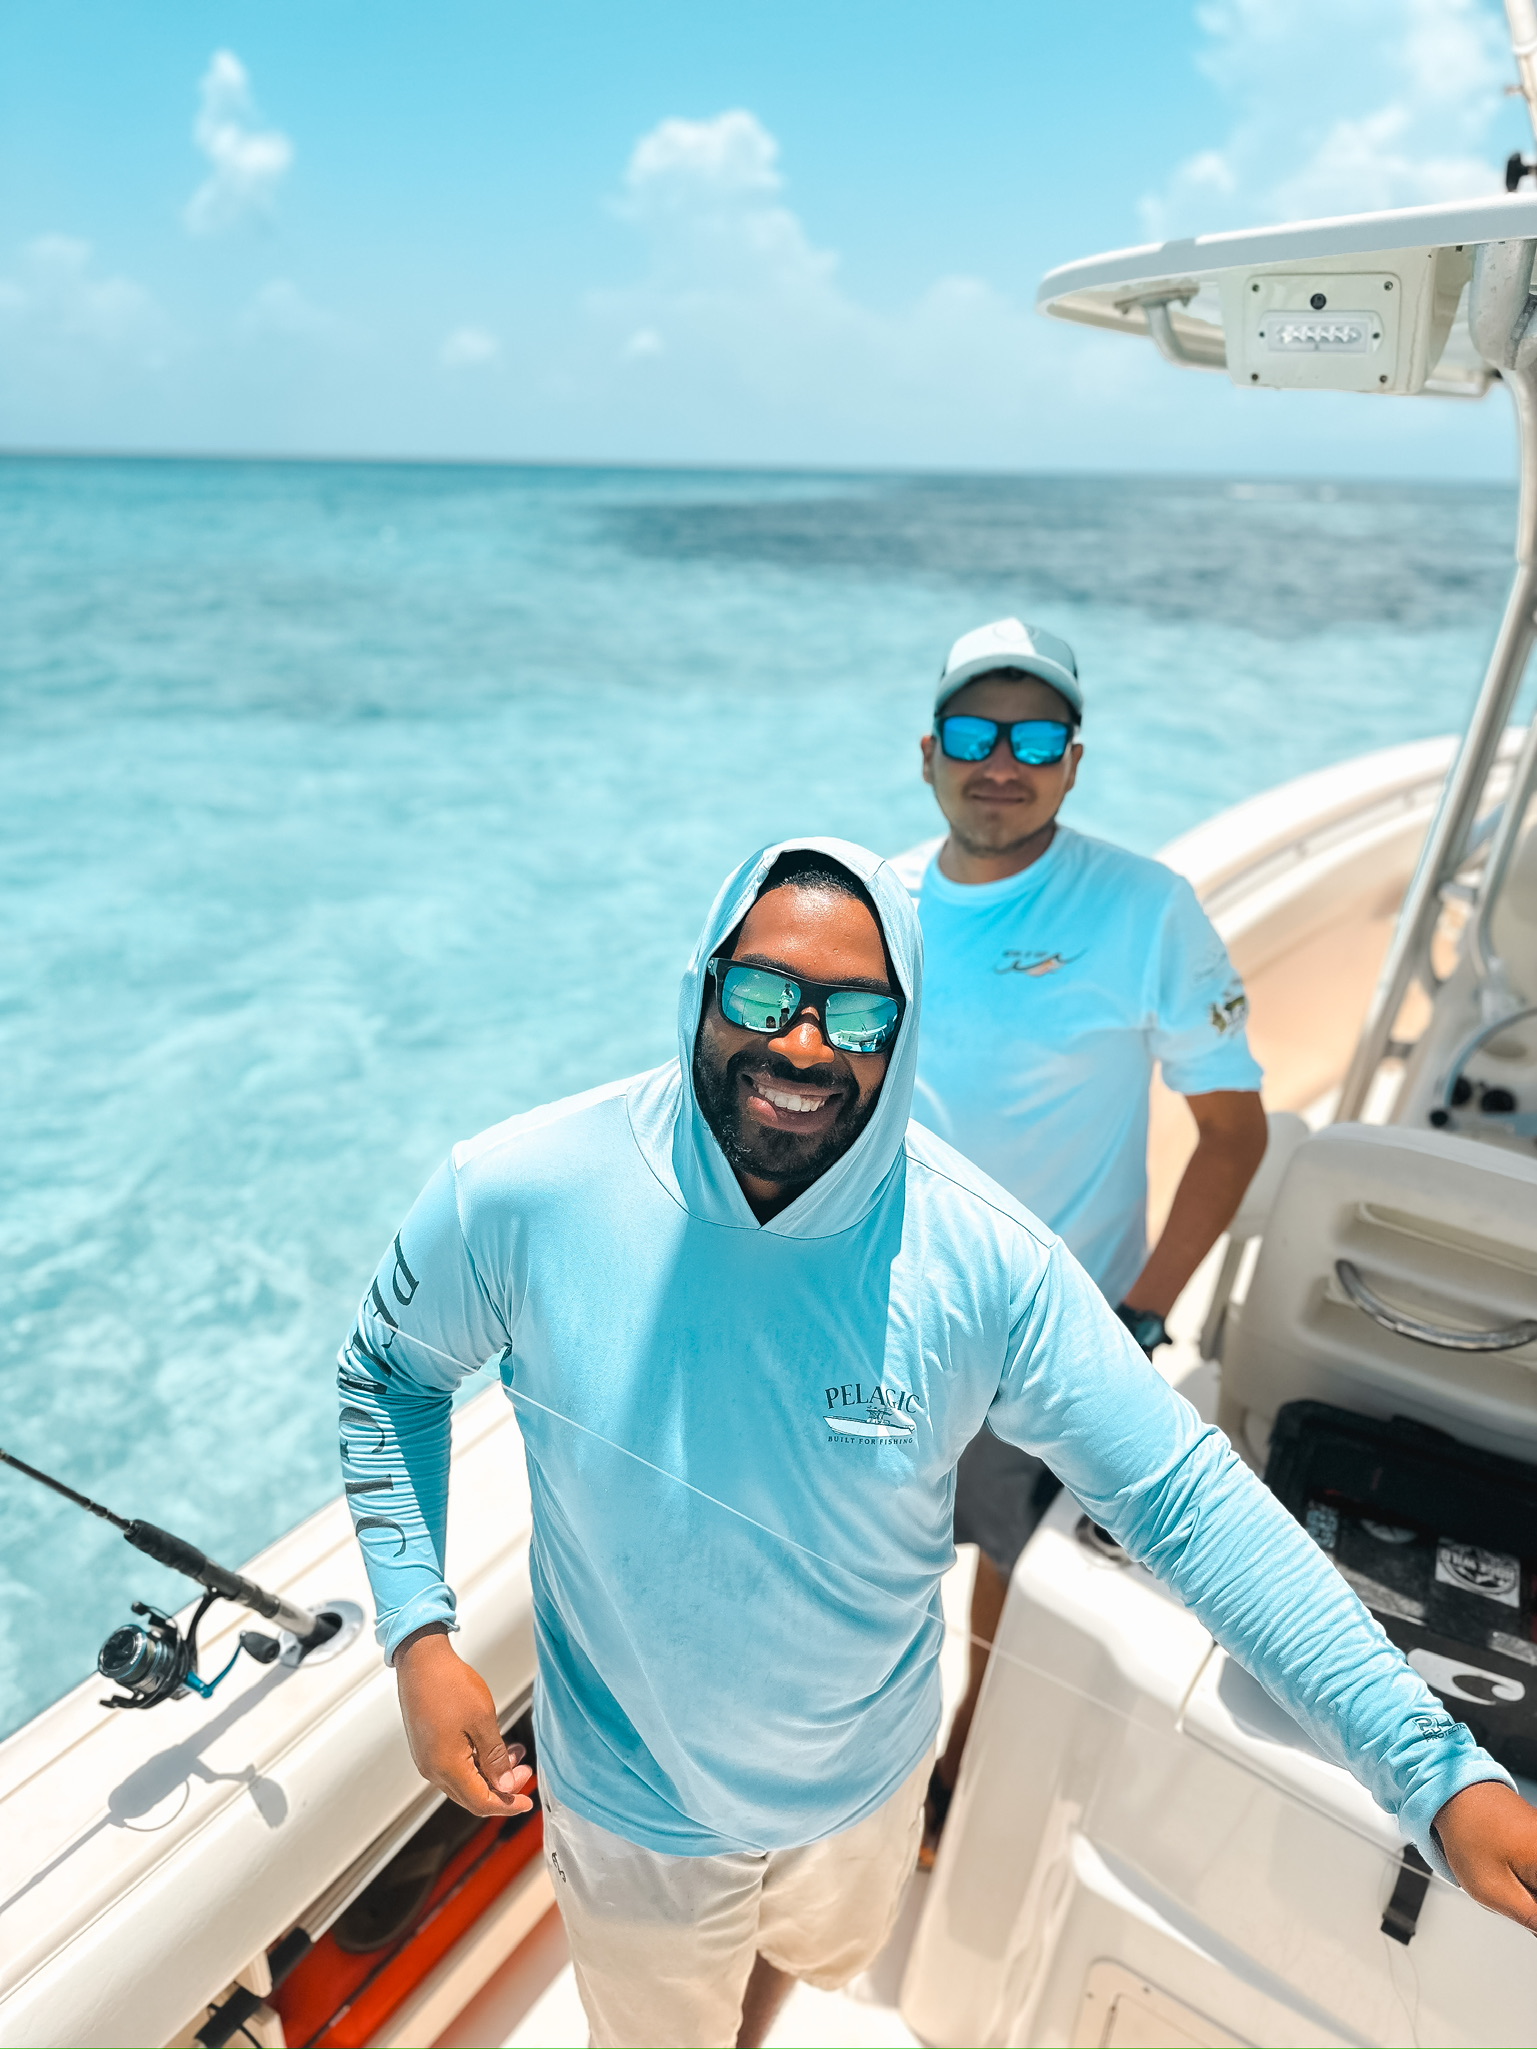 Two experienced fishing guides from Belize Reef Charters showcasing their expertise against the scenic backdrop of Belize's waters.